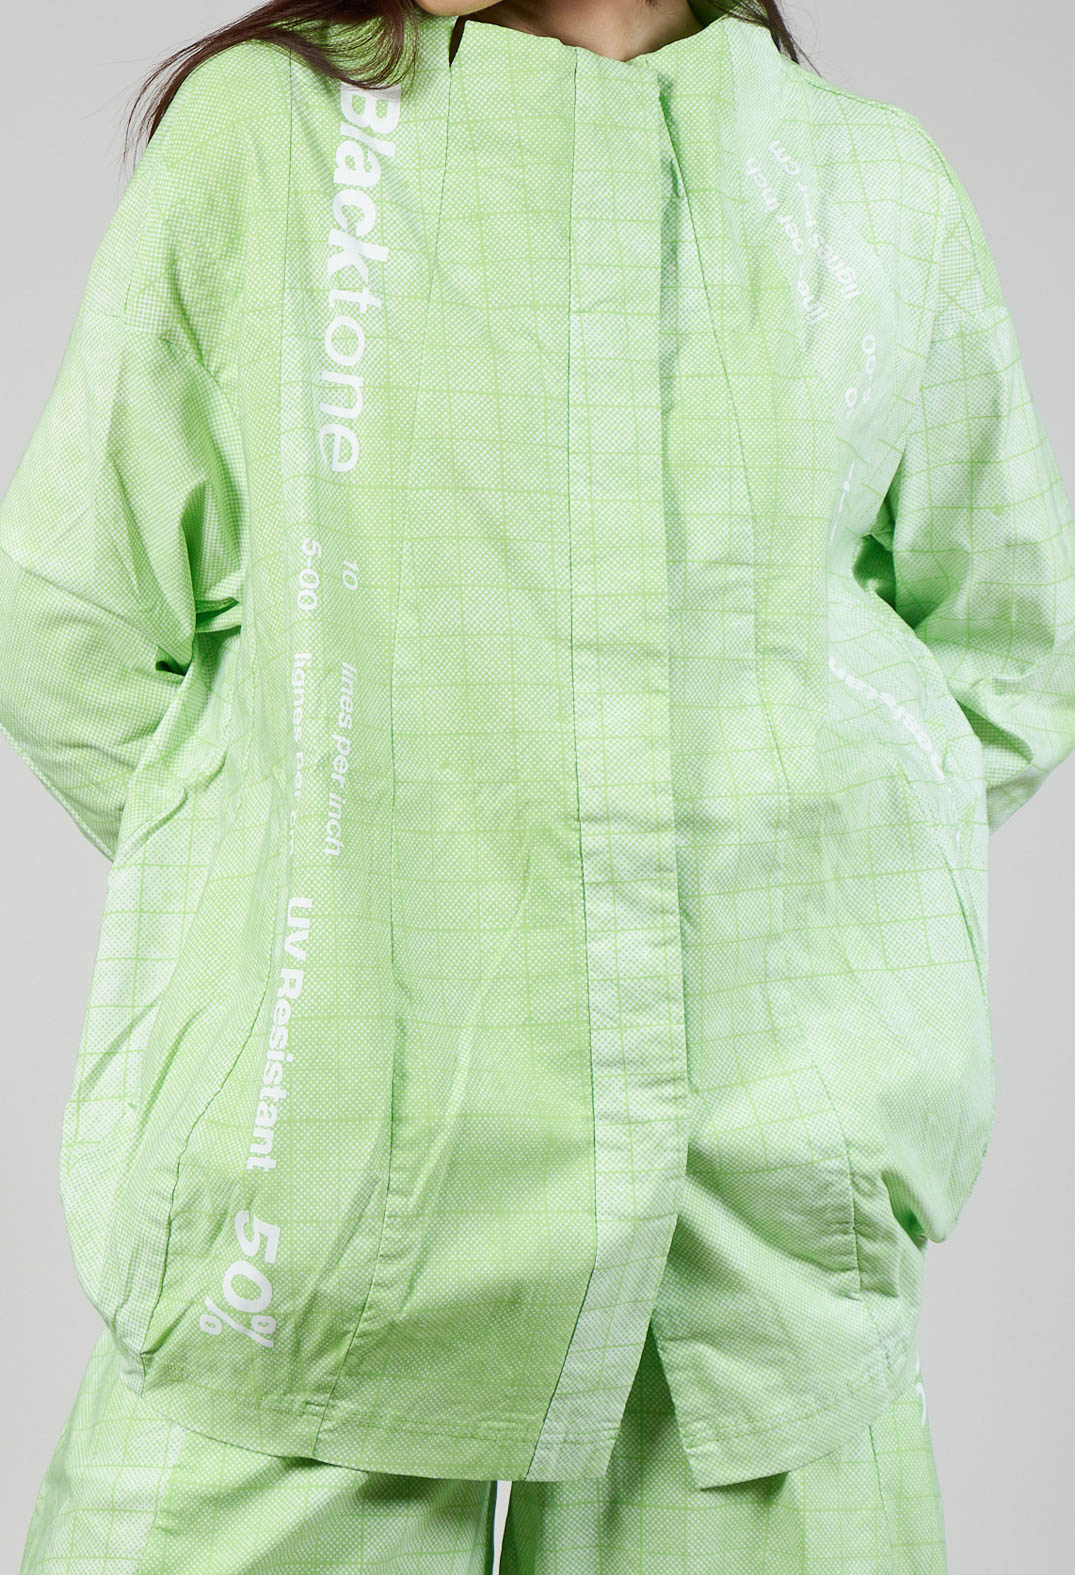 Relaxed Fit Jacket in Placed Lime Print